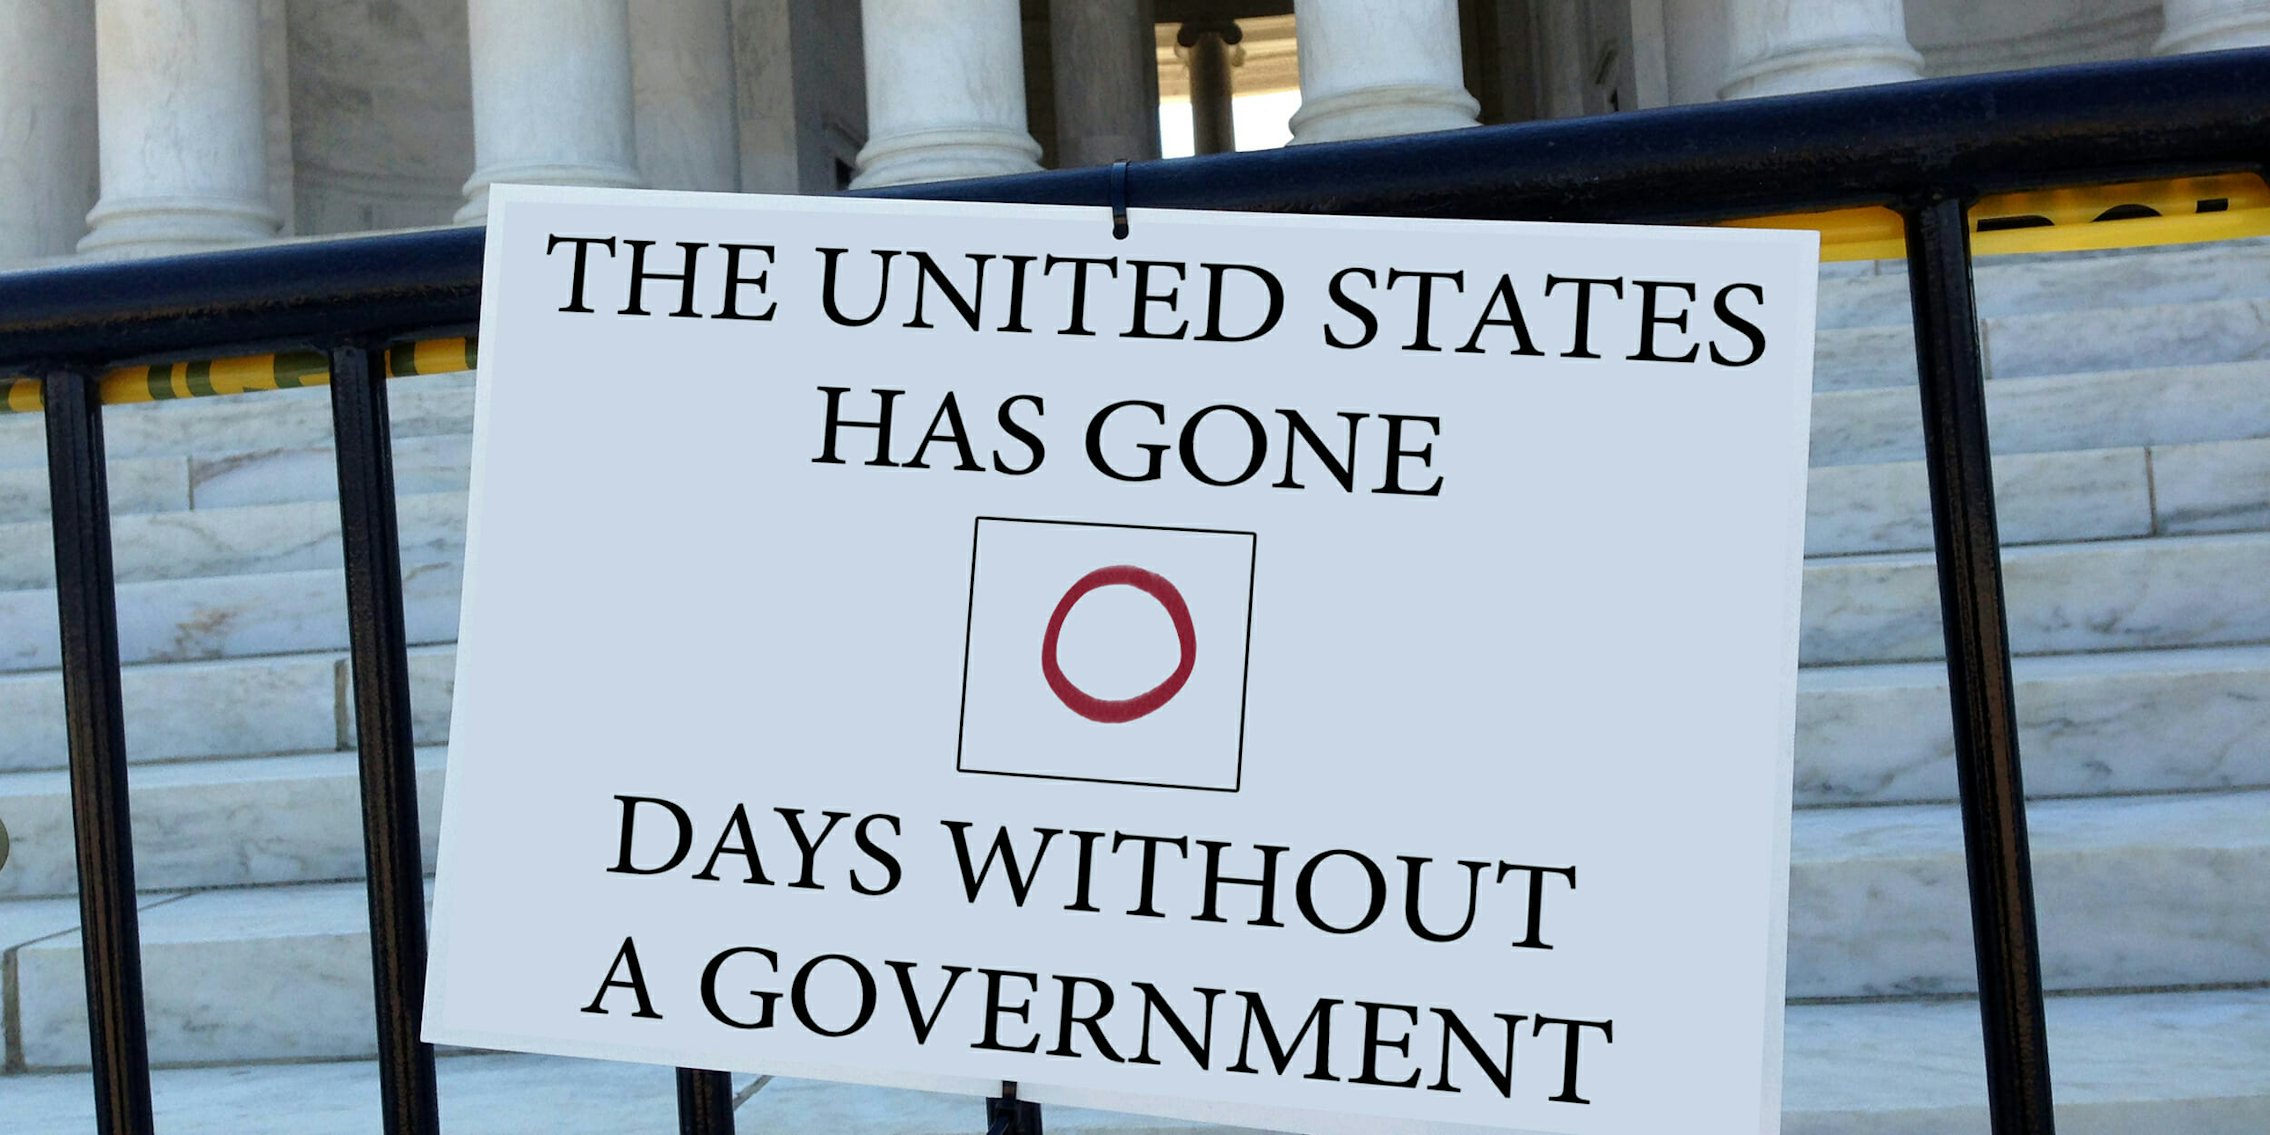 'The United States has gone 0 days without a government' sign hanging on fence in front of government building